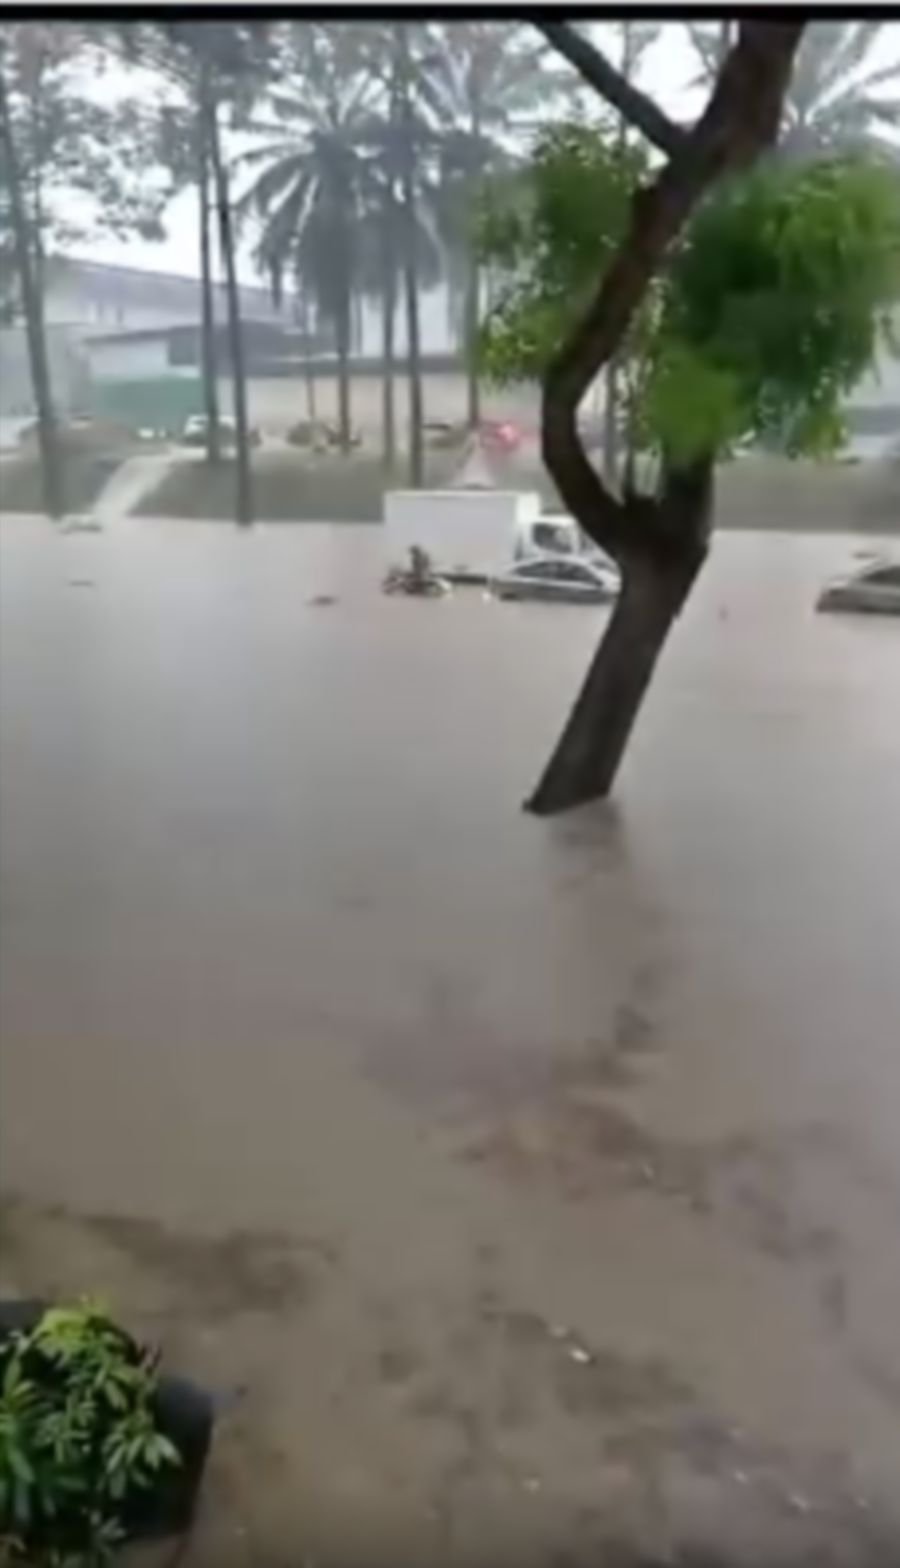  A number of cars were left stranded on the road after several areas in Melaka have been hit by flash floods following torrential rain this afternoon. — SCREENGRAB FROM SOCIAL MEDIA 